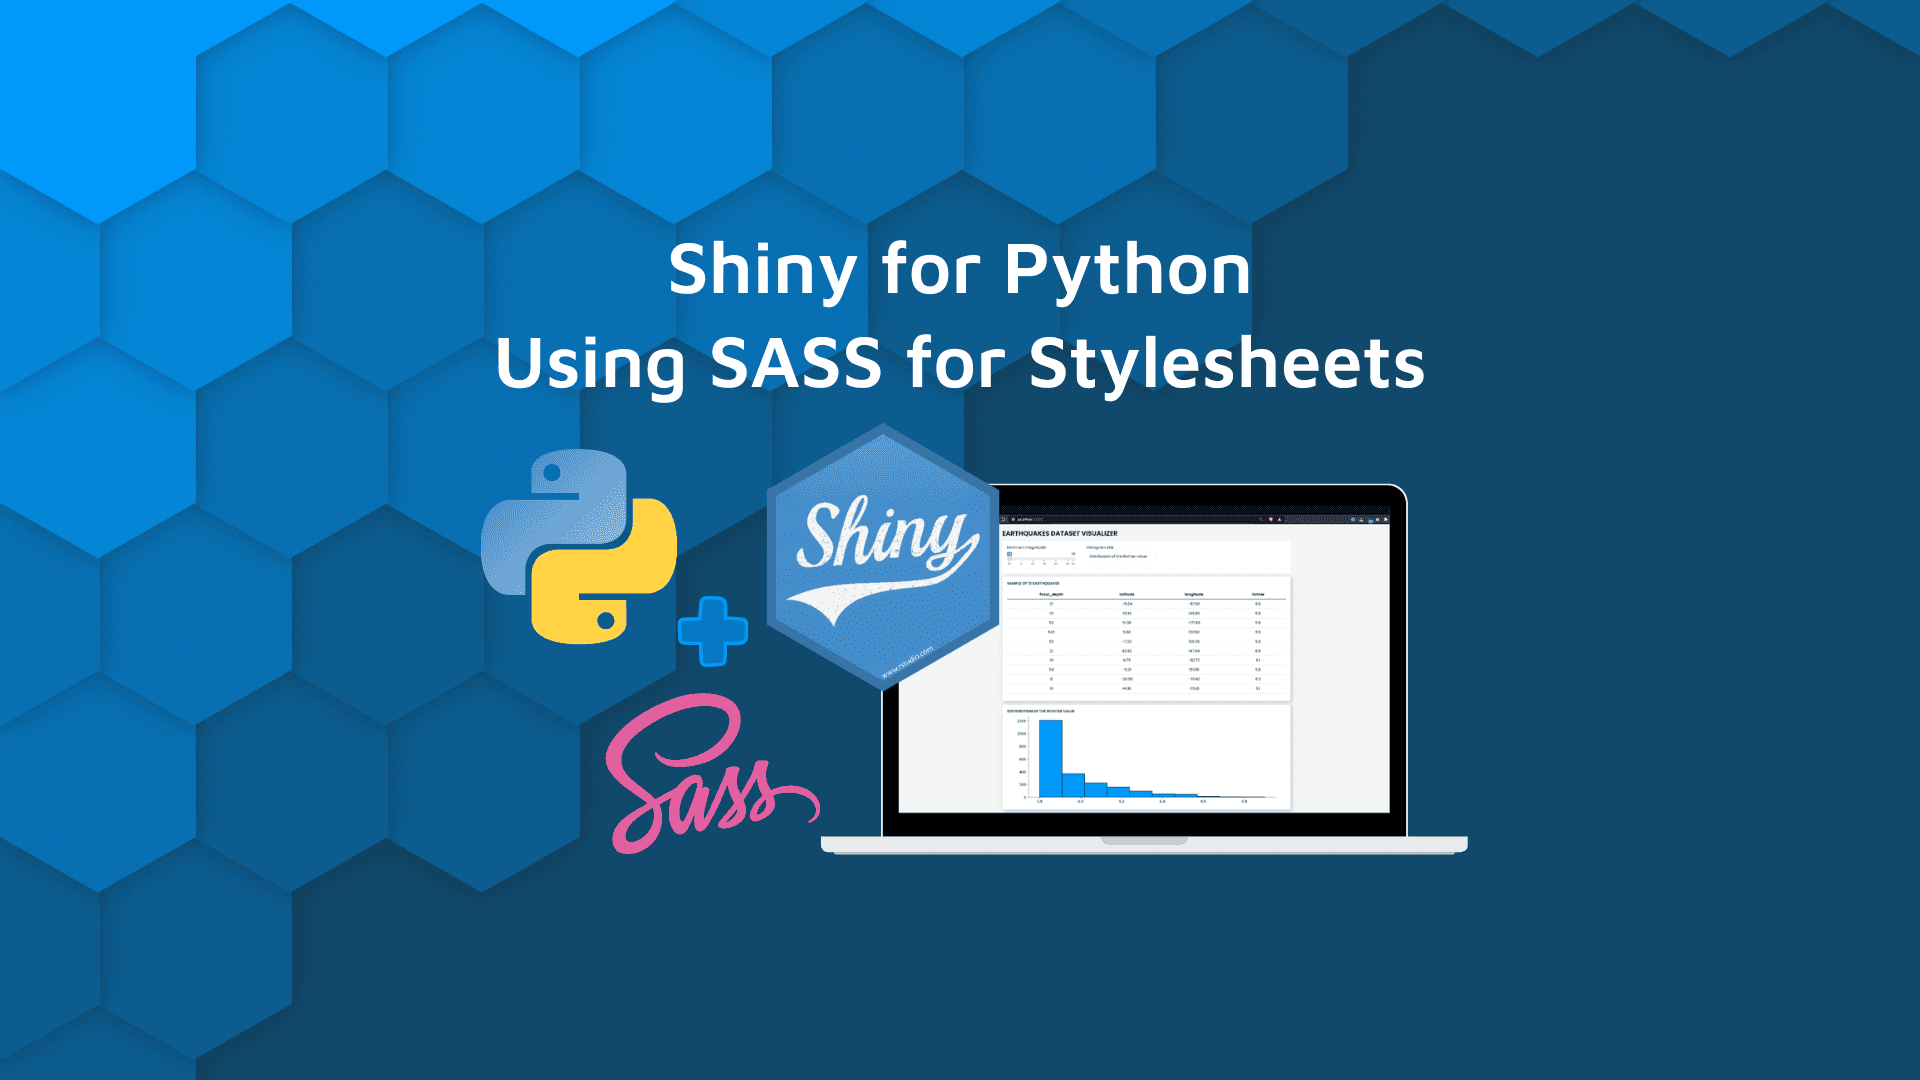 SASS/SCSS in Shiny for Python dashboard